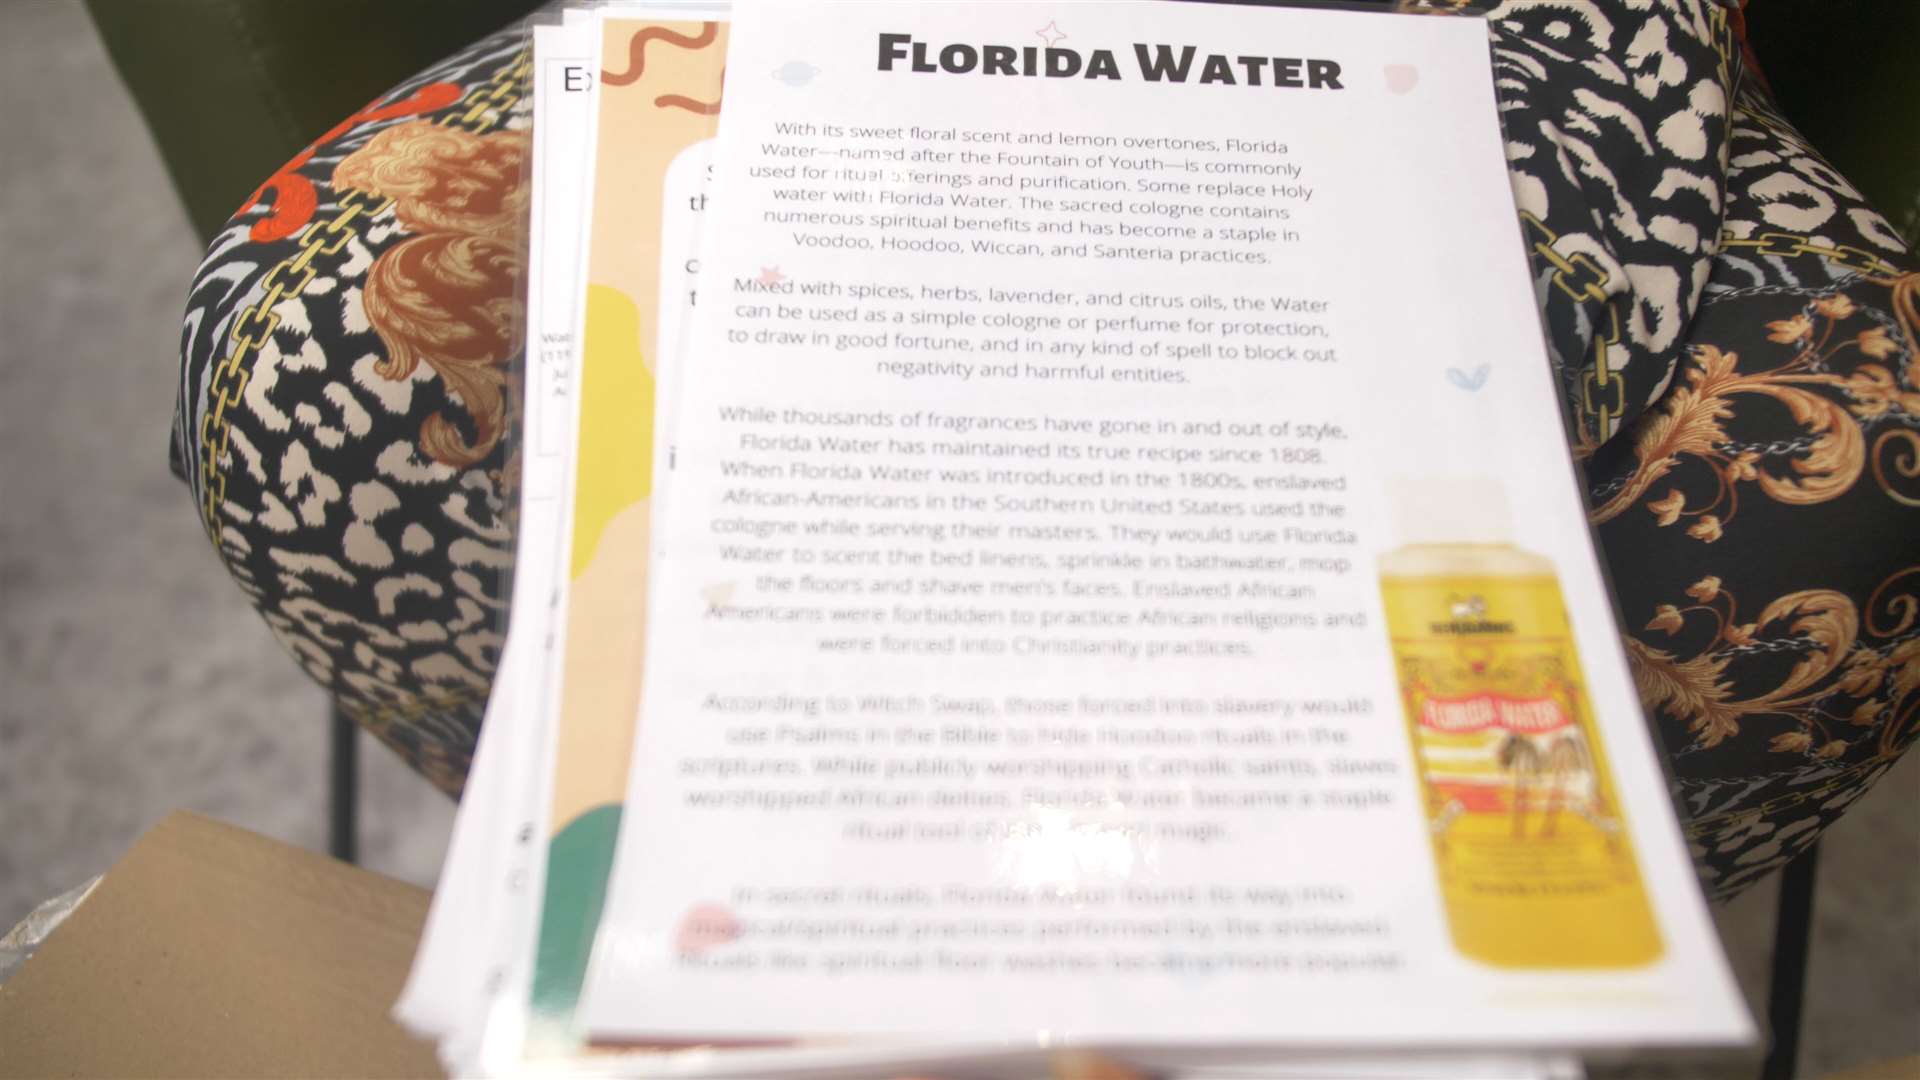 You'll find out what Florida Water is